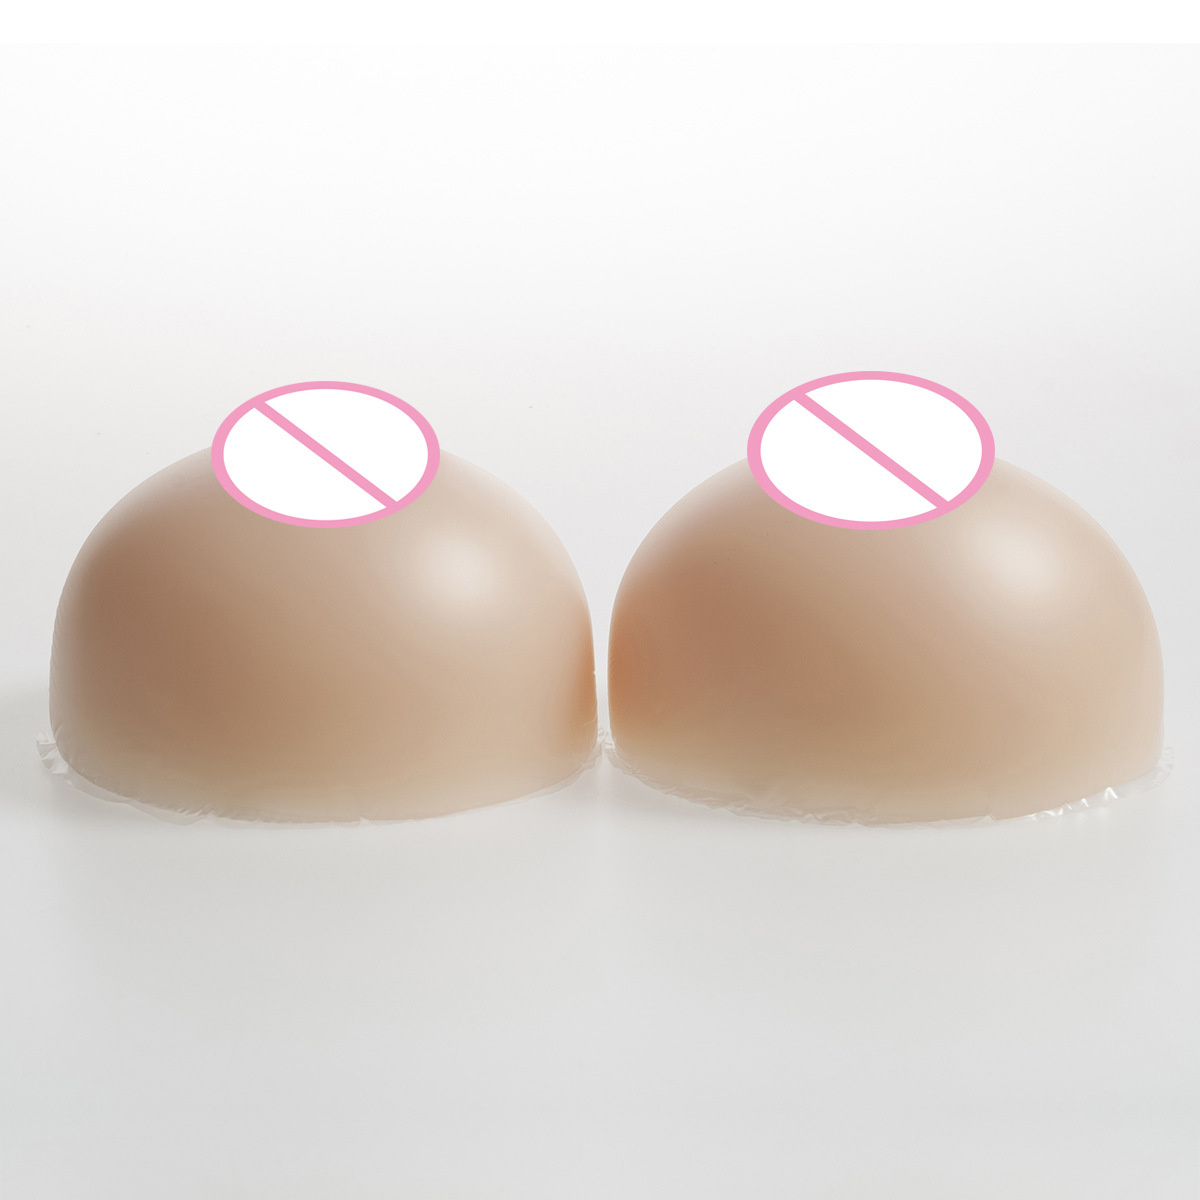 600g/Pair B cup Silicone Round Fake Breast Lifelike Boobs Forms Chest Enhancer Change From Man to Women Shemale Props